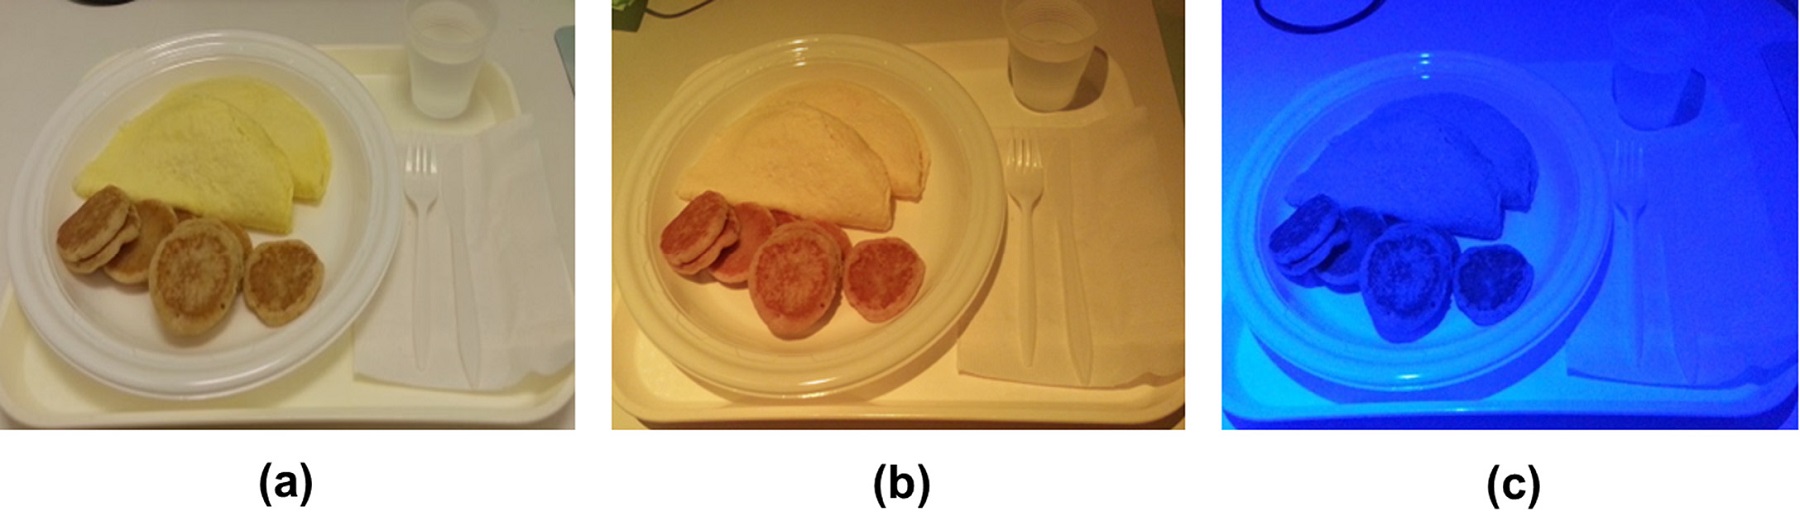 Fig. 1 from S. Cho et al./Appetite 85 (2015) 111–117